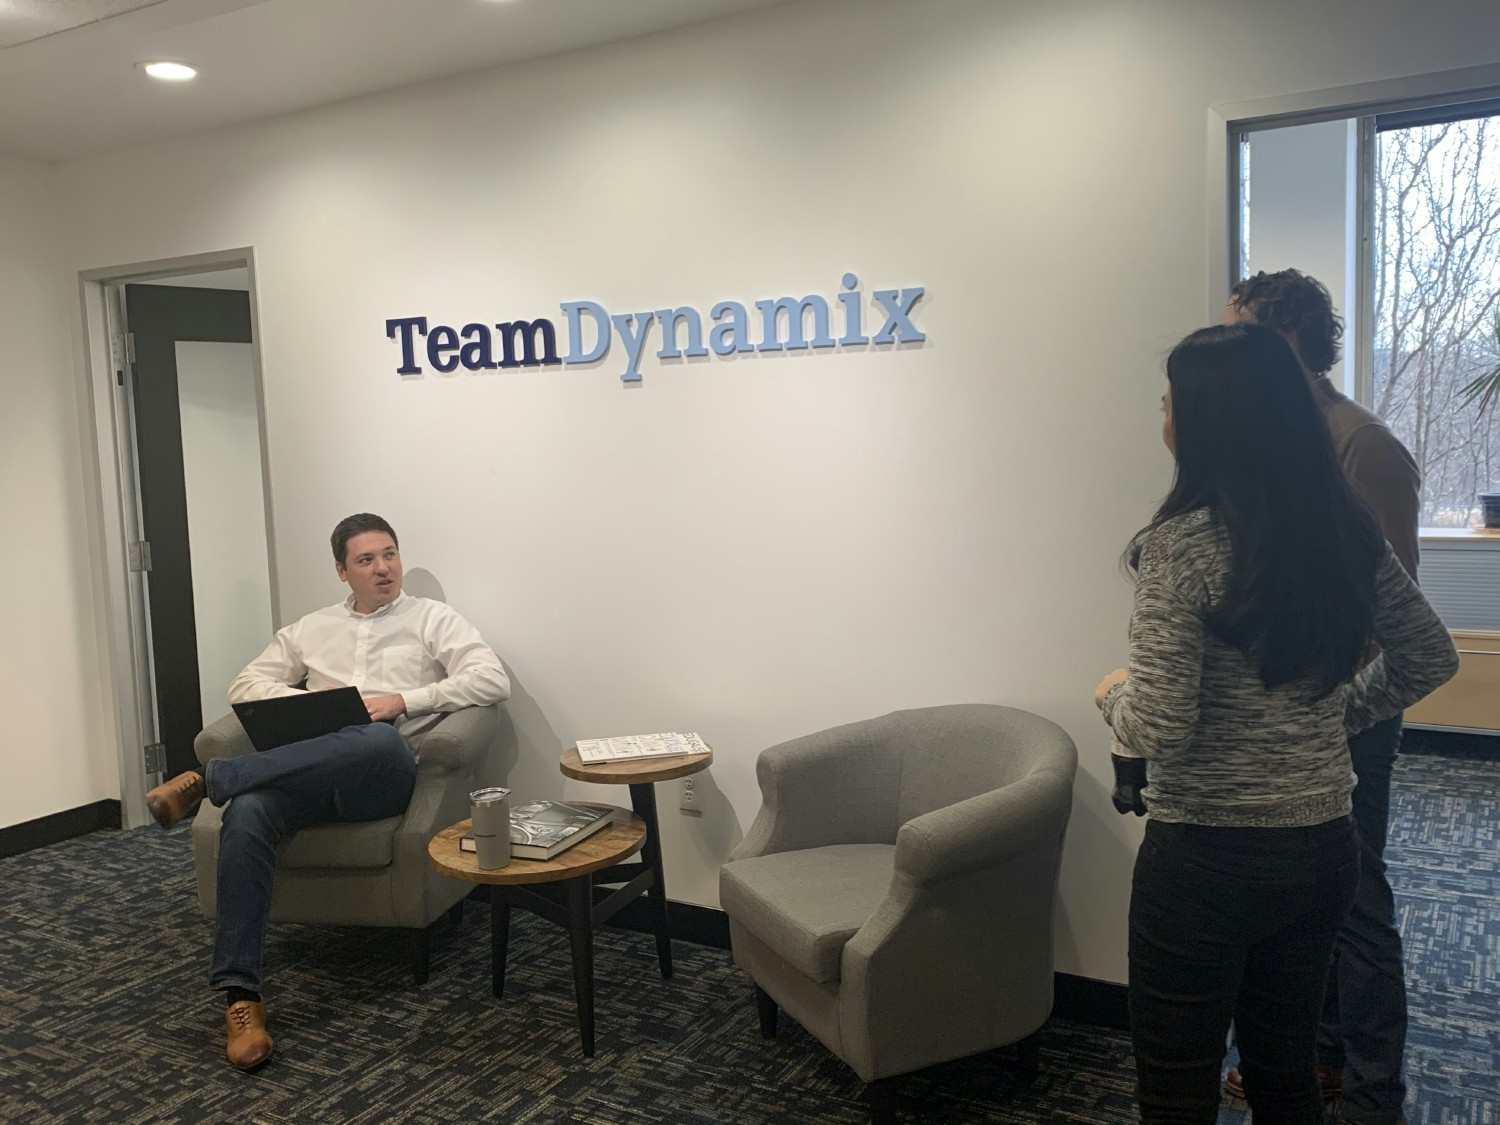 TeamDynamix employees catching a break between sessions of company's All-Hands meeting in January 2020